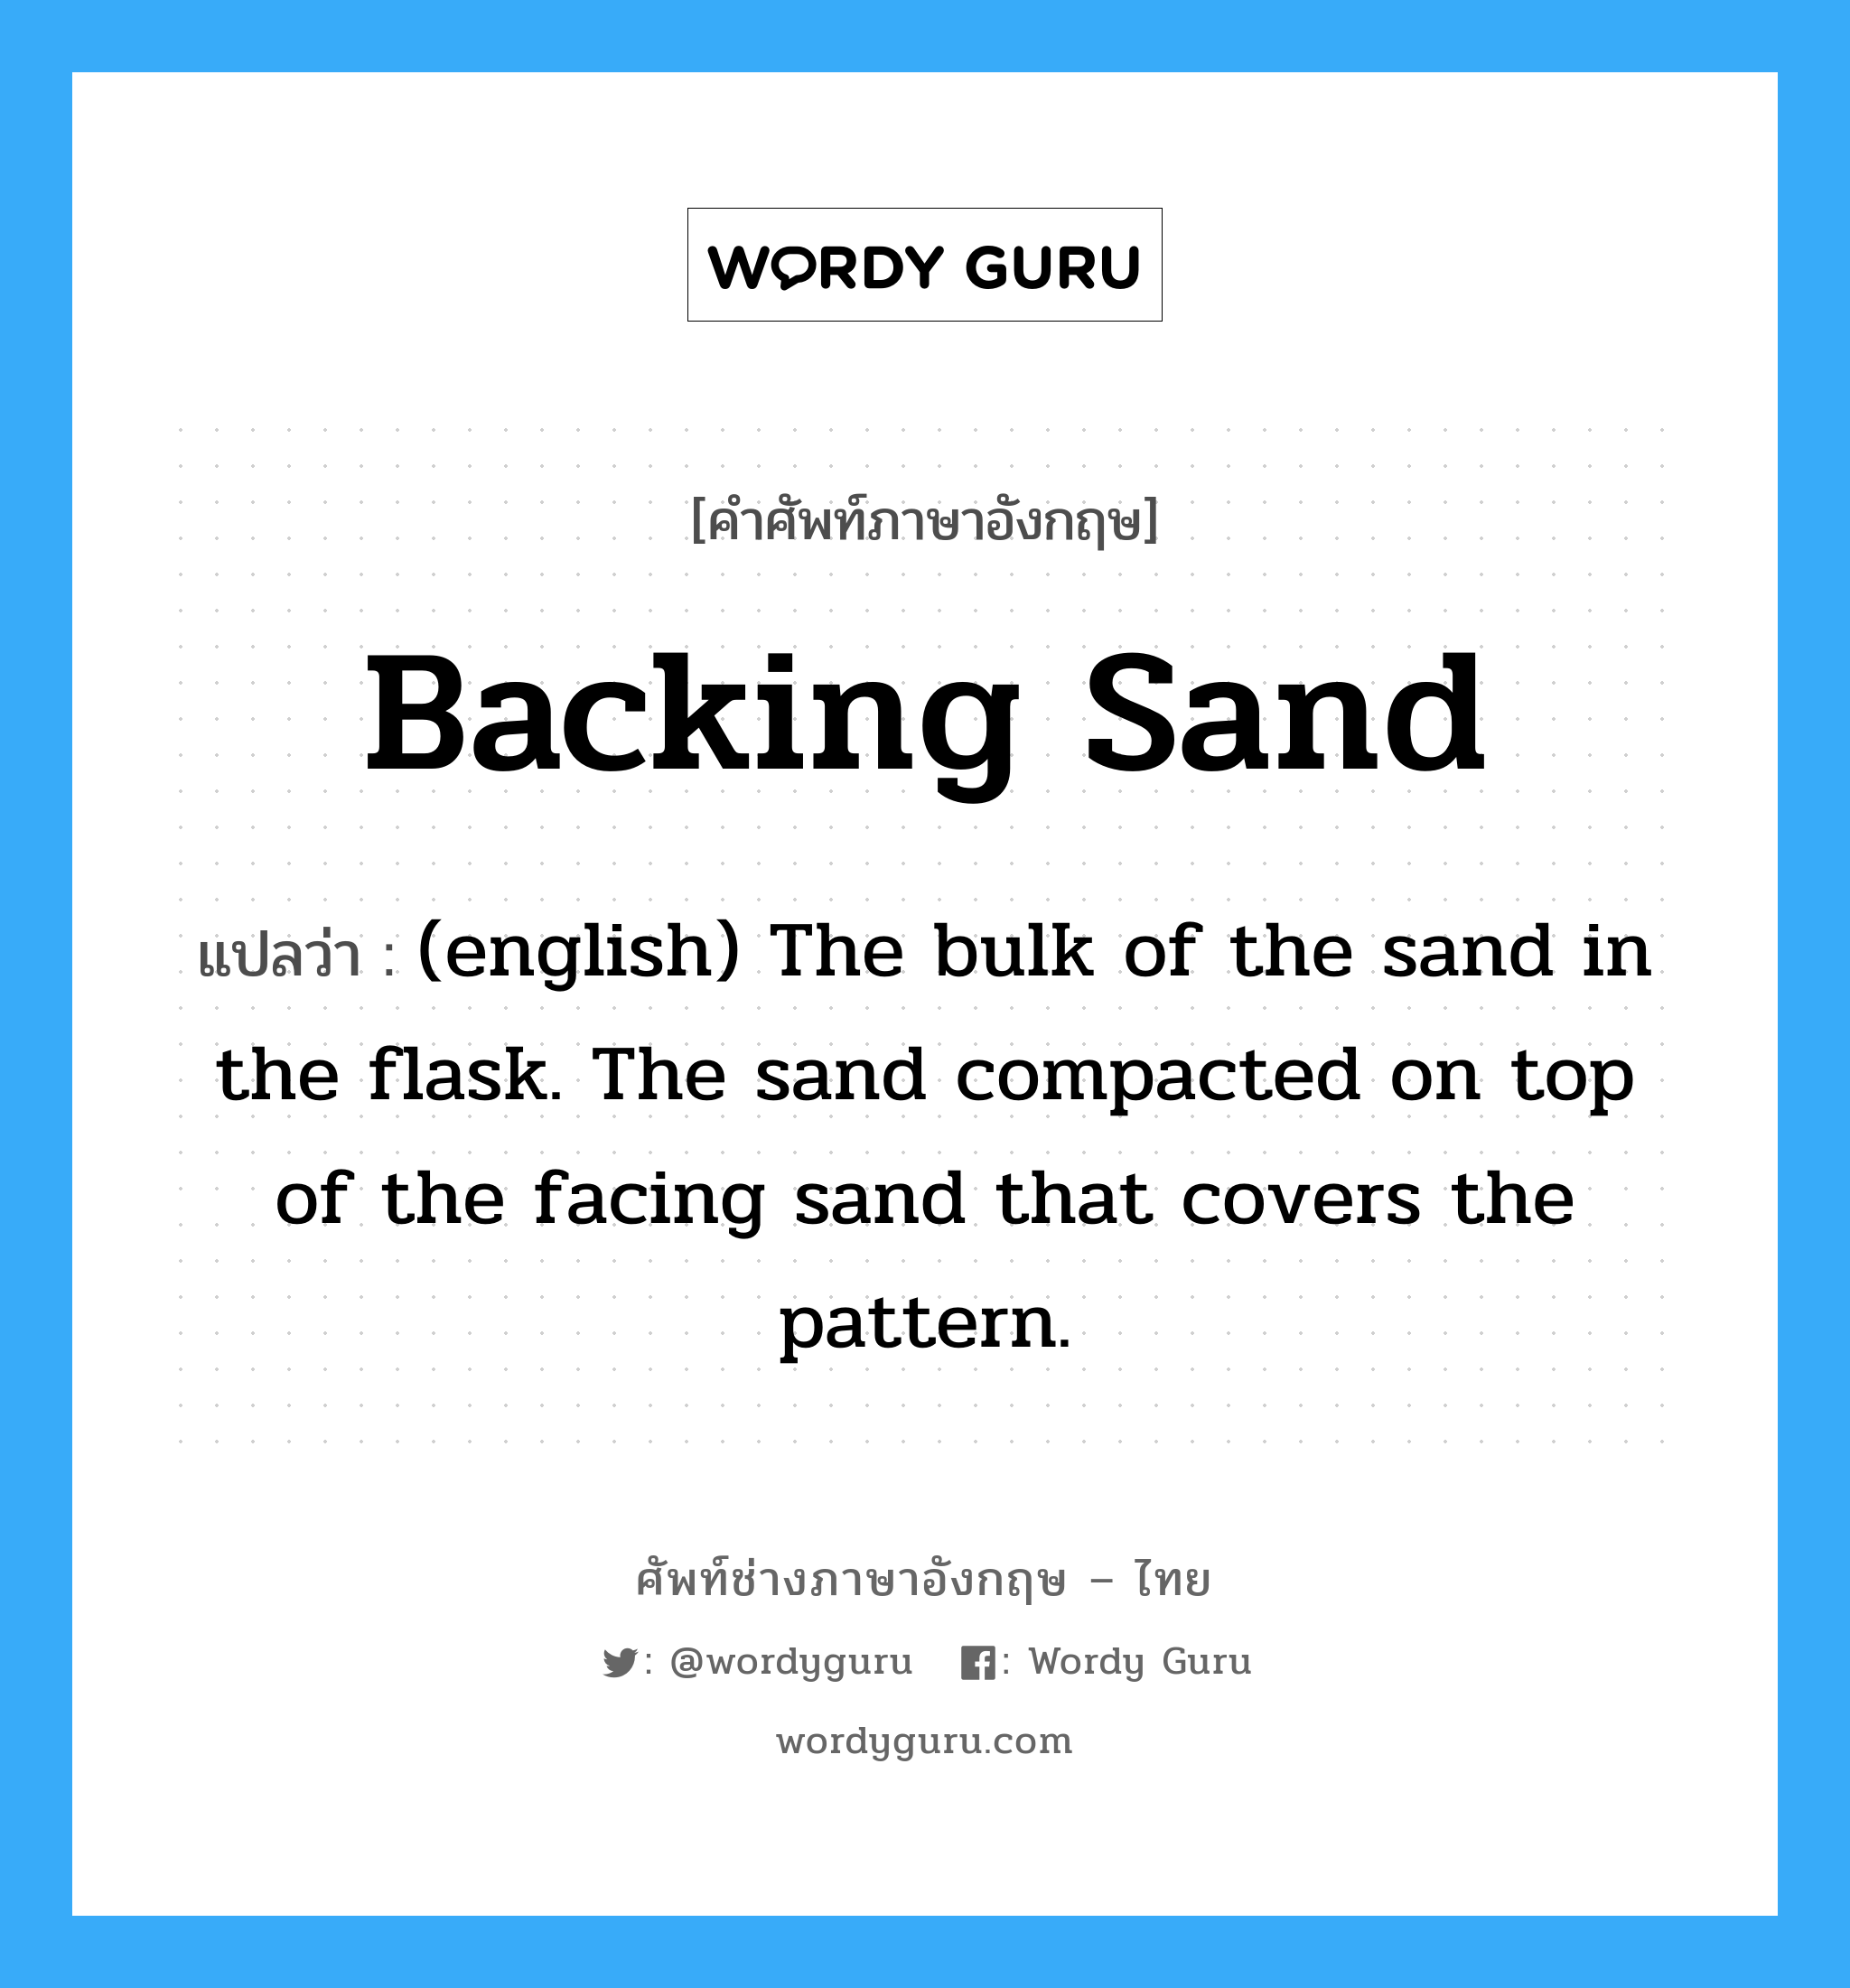 Backing Sand แปลว่า?, คำศัพท์ช่างภาษาอังกฤษ - ไทย Backing Sand คำศัพท์ภาษาอังกฤษ Backing Sand แปลว่า (english) The bulk of the sand in the flask. The sand compacted on top of the facing sand that covers the pattern.